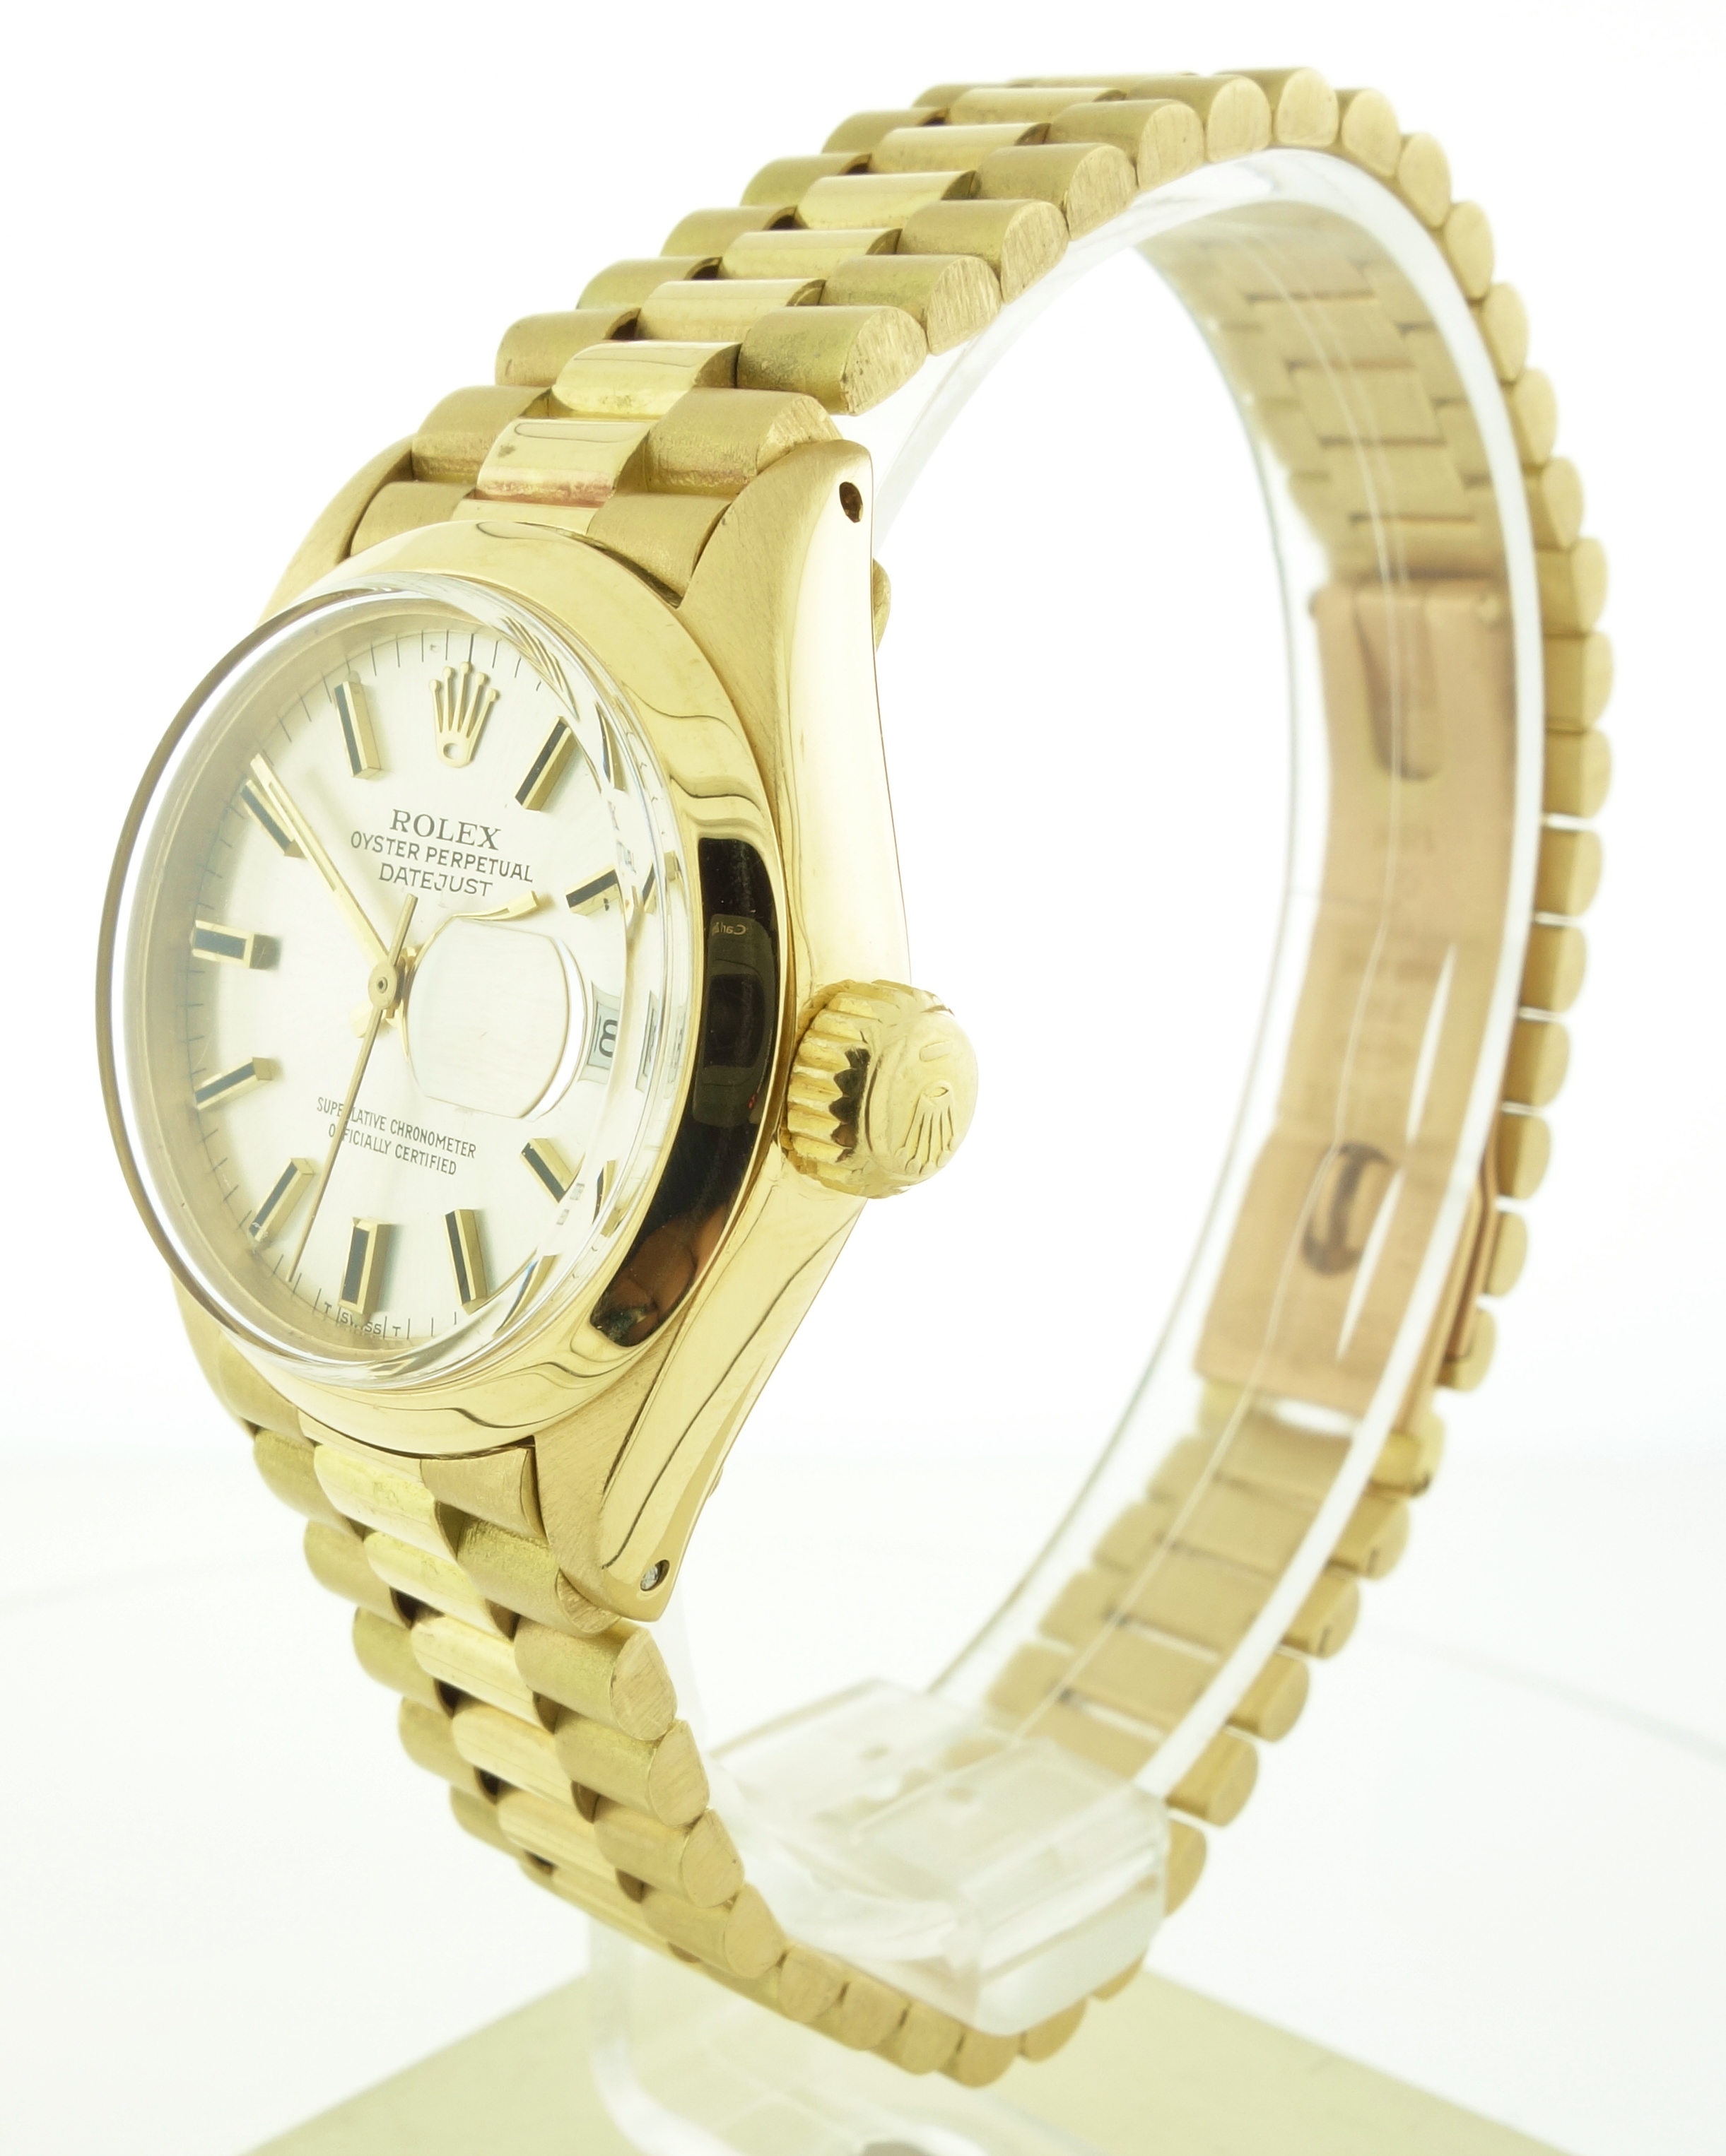 Rolex Lady Datejust – 6917 - Image 2 of 4